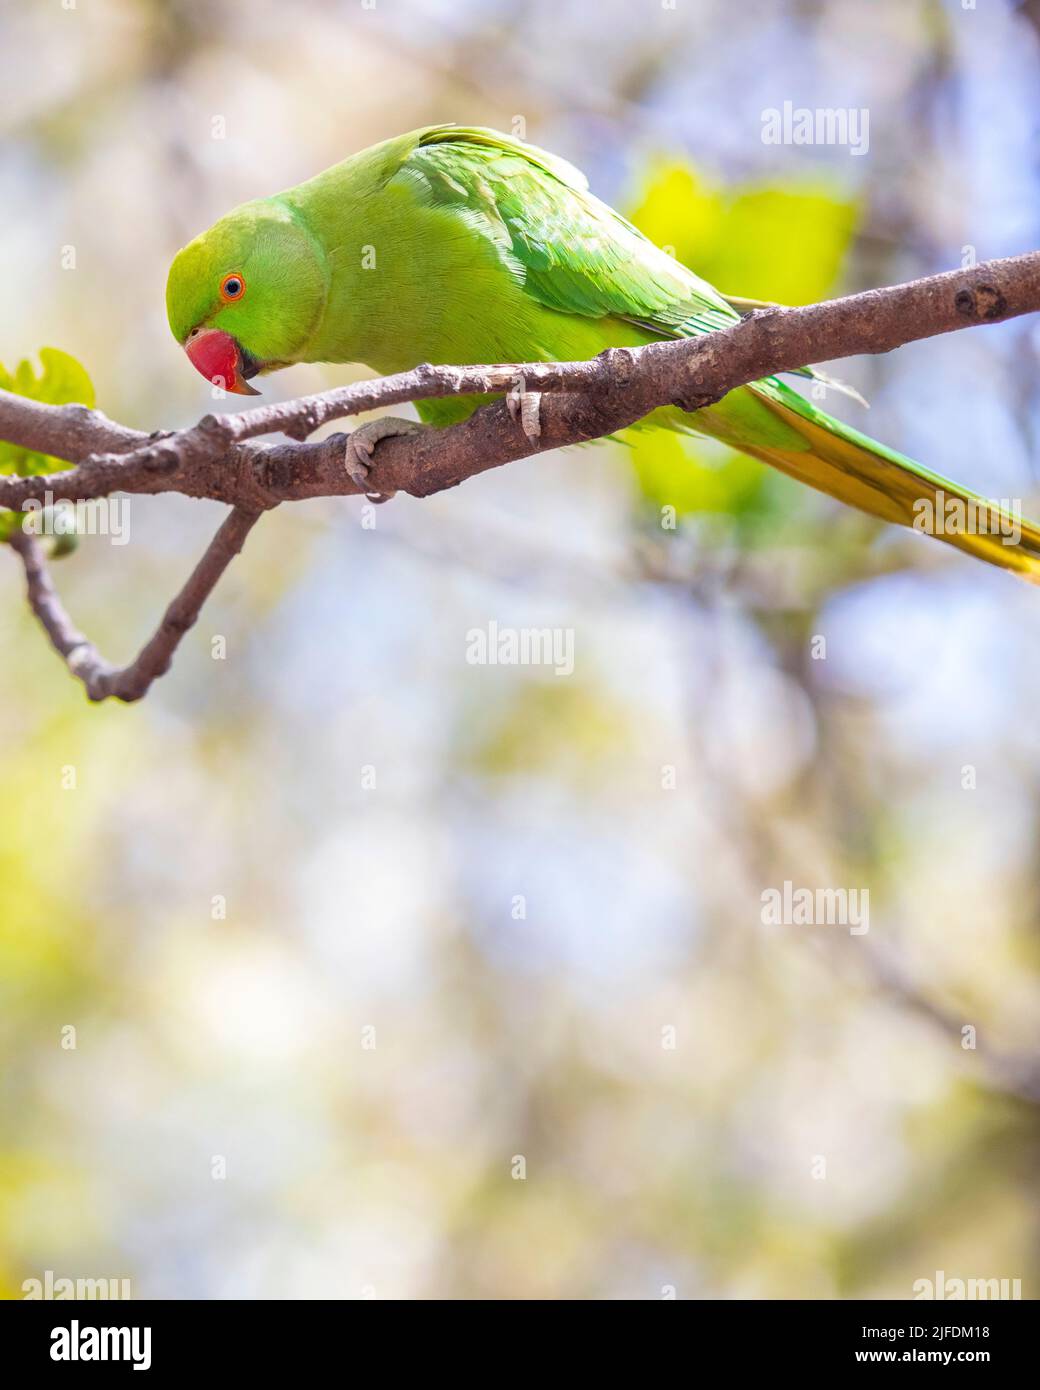 A beautiful green Parakeet in a central London park. Stock Photo